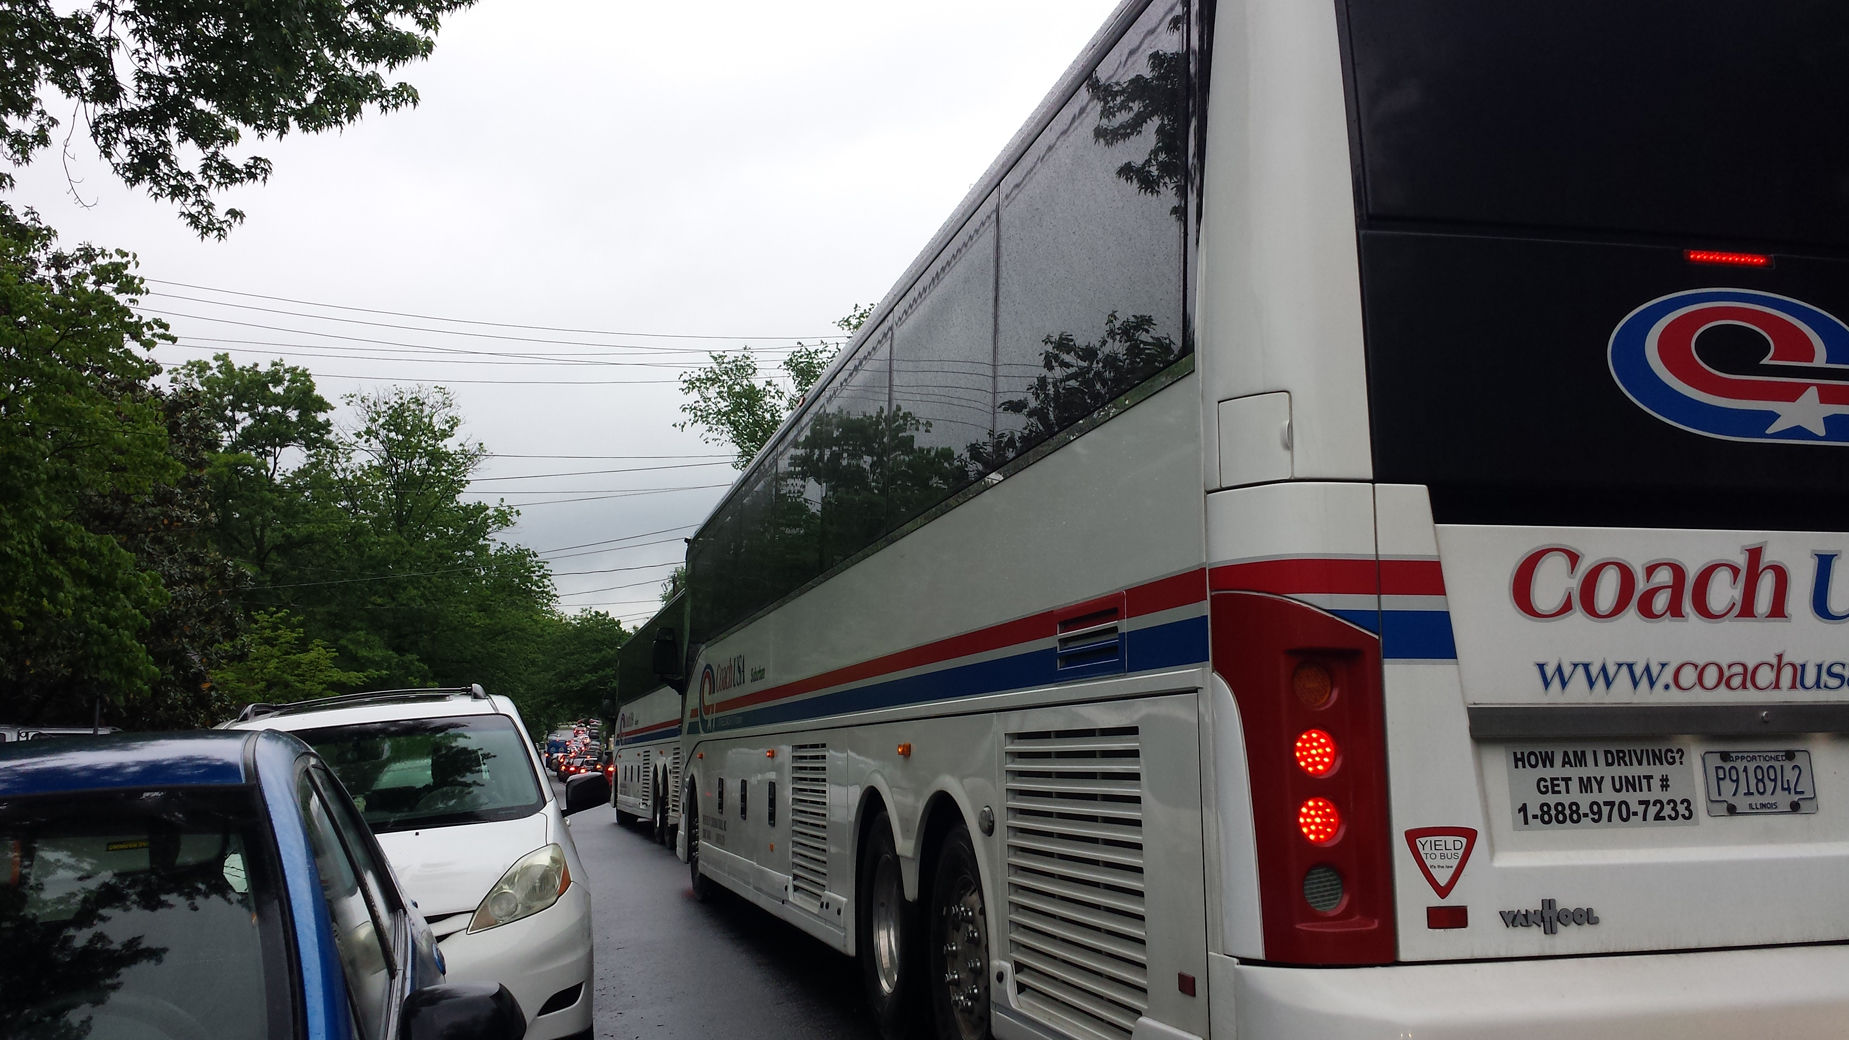 tour buses on East Taylor Run Parkway